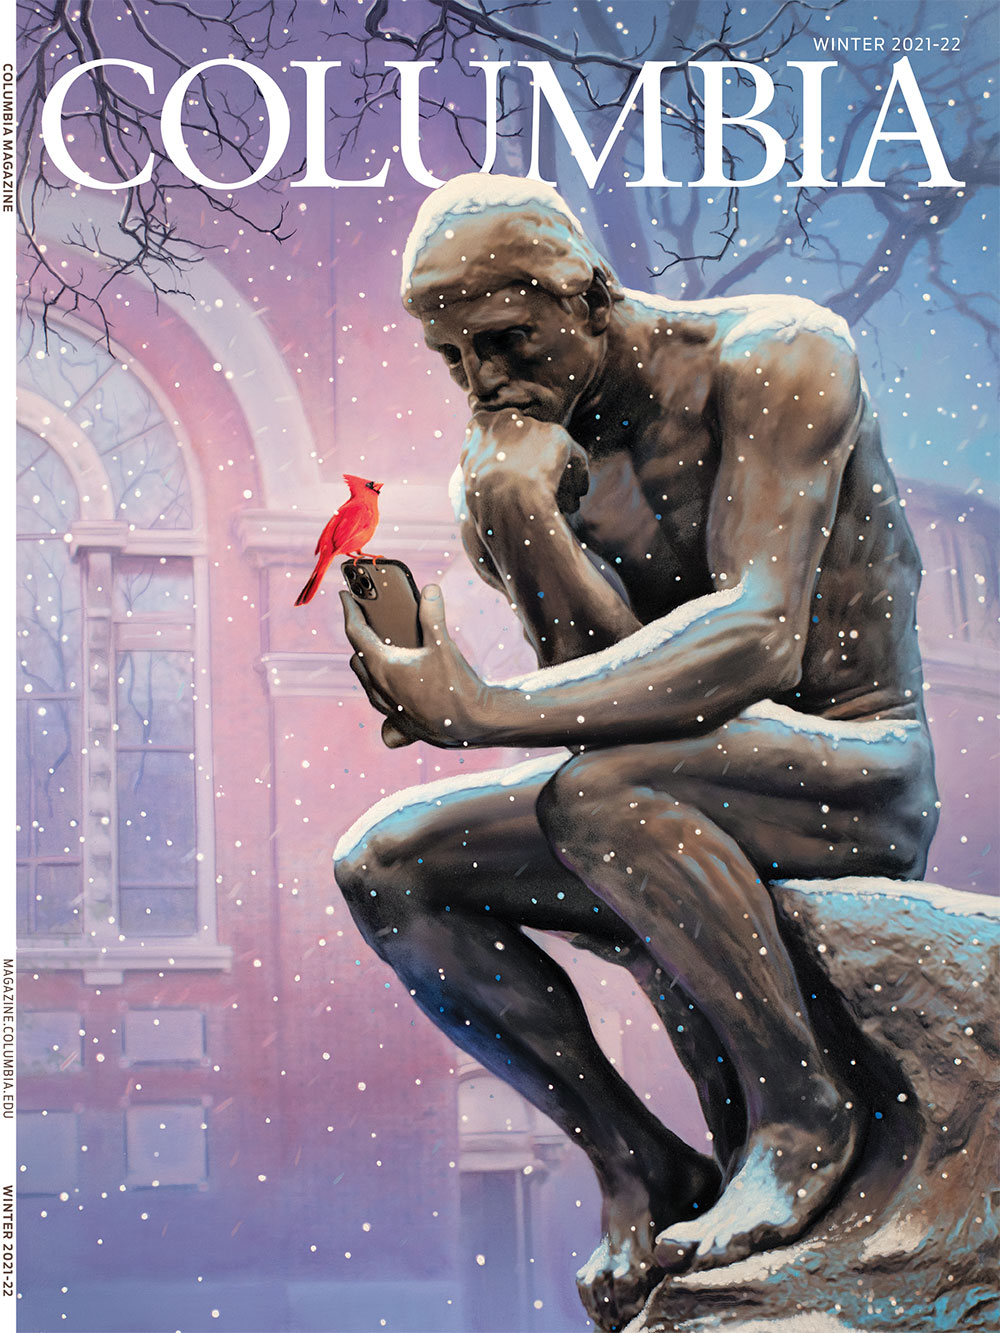 Winter 2021-22 cover of Columbia Magazine, featuring illustration by Tim O'Brien of Columbia University's "The Thinker" sculpture